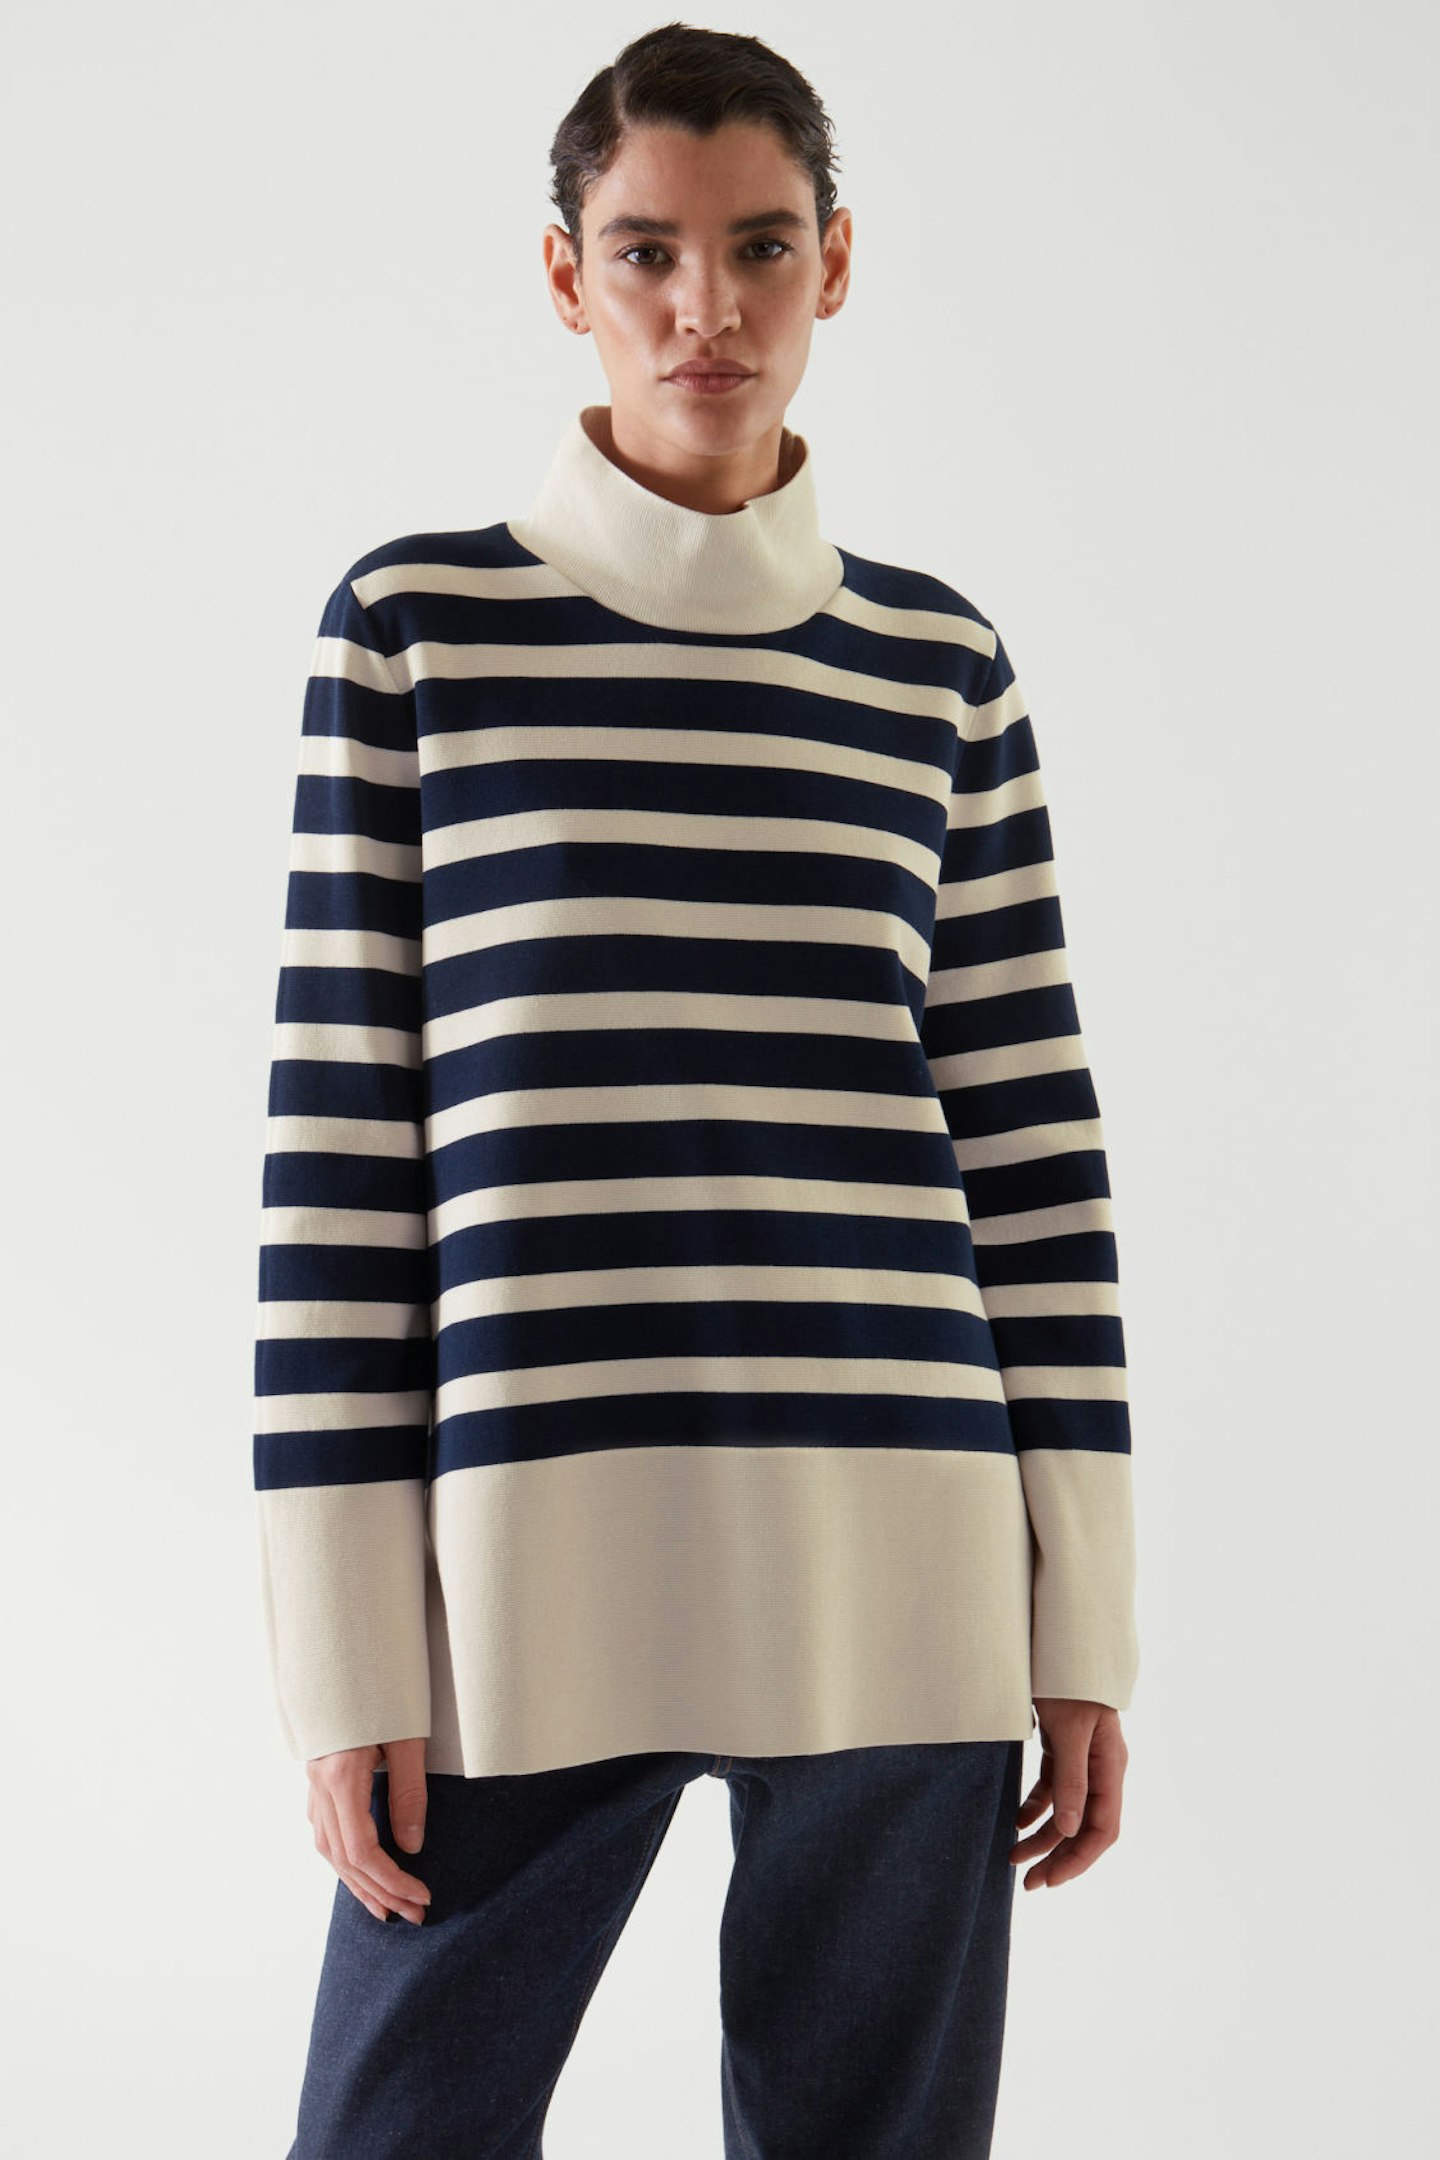 COS, Roll Neck Striped Top, £69